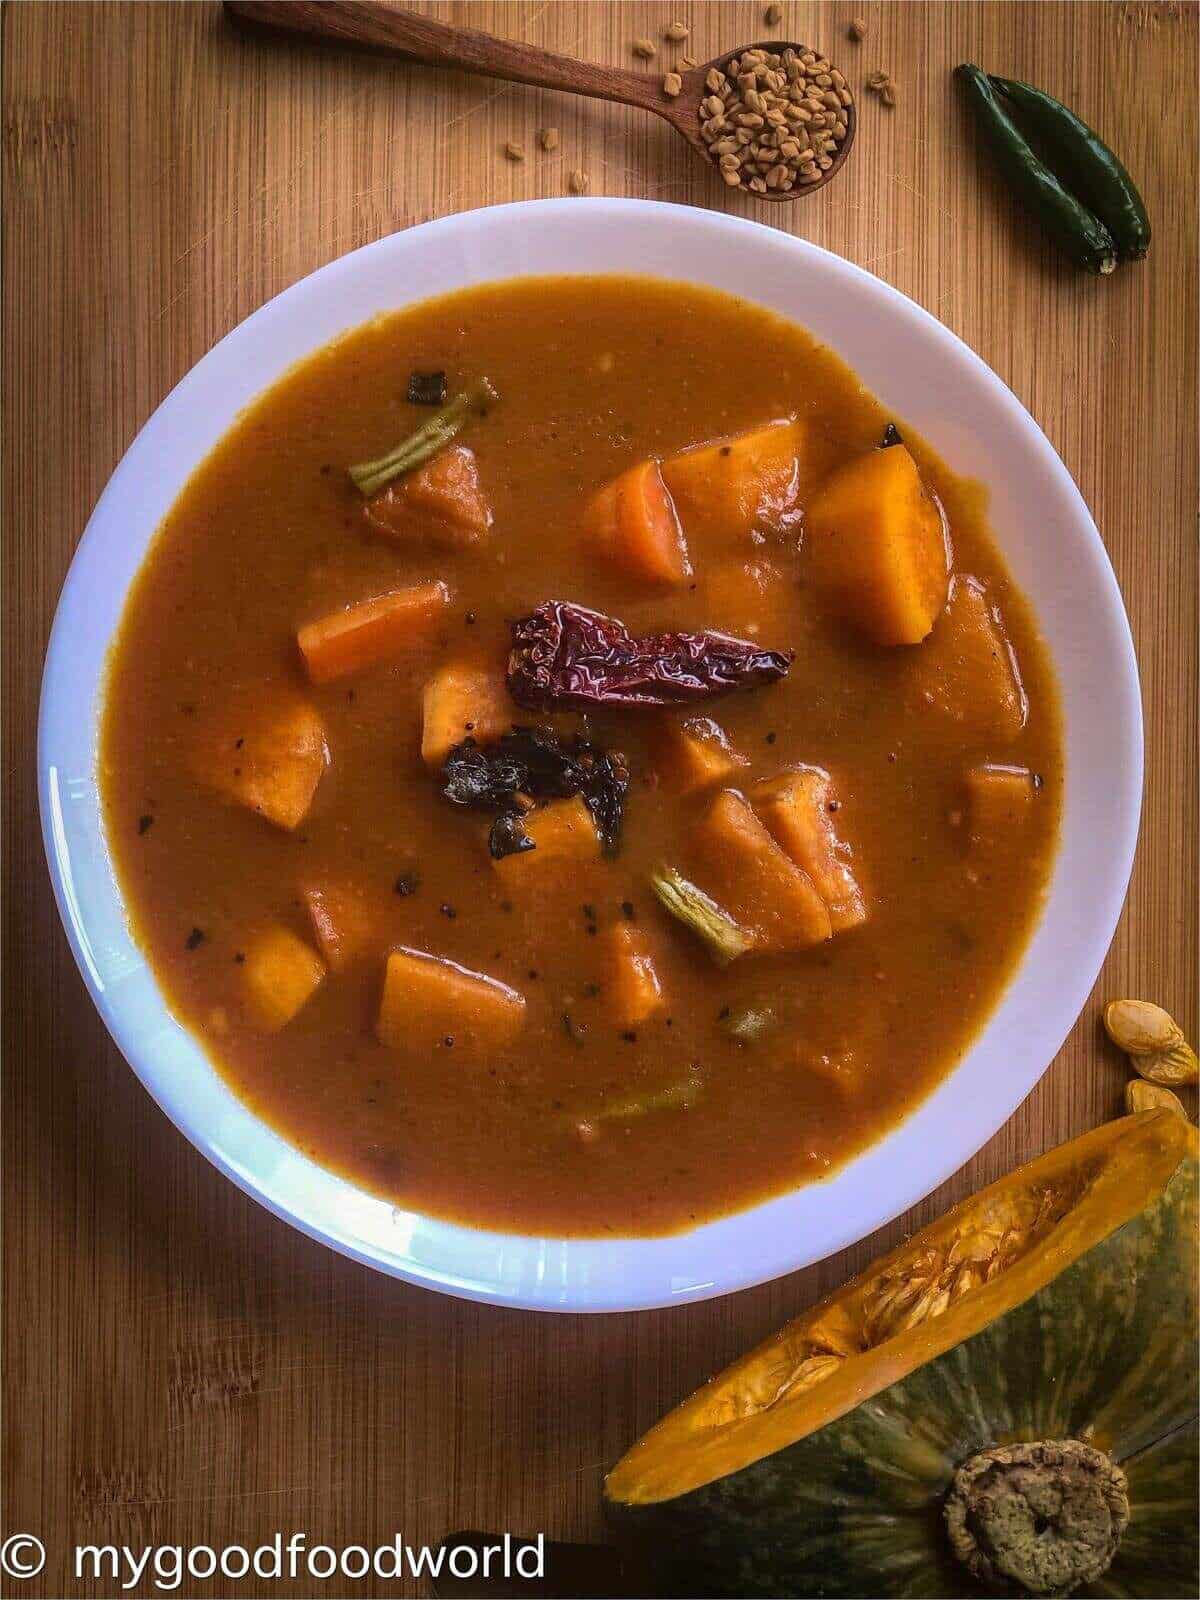 Vegan stew served in a wide white bowl with a cut pumpkin and spices next to the bowl.